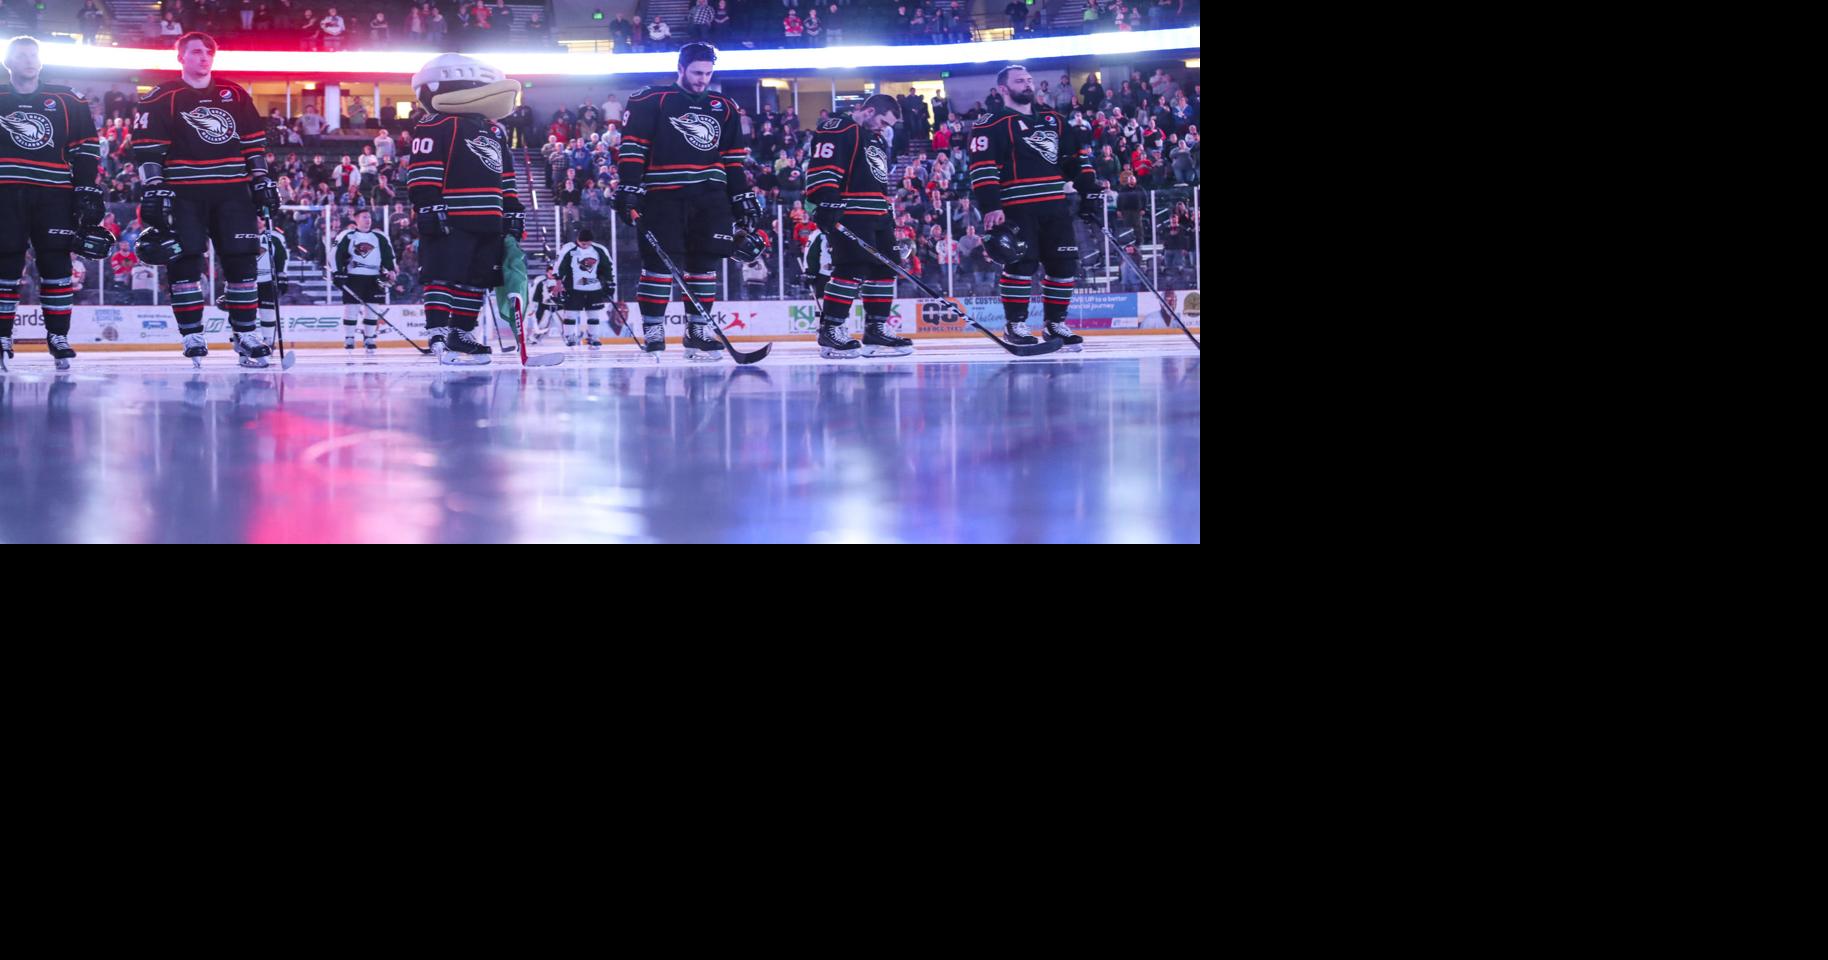 Quad City Mallards Will be Featured in Next NHL Video Game